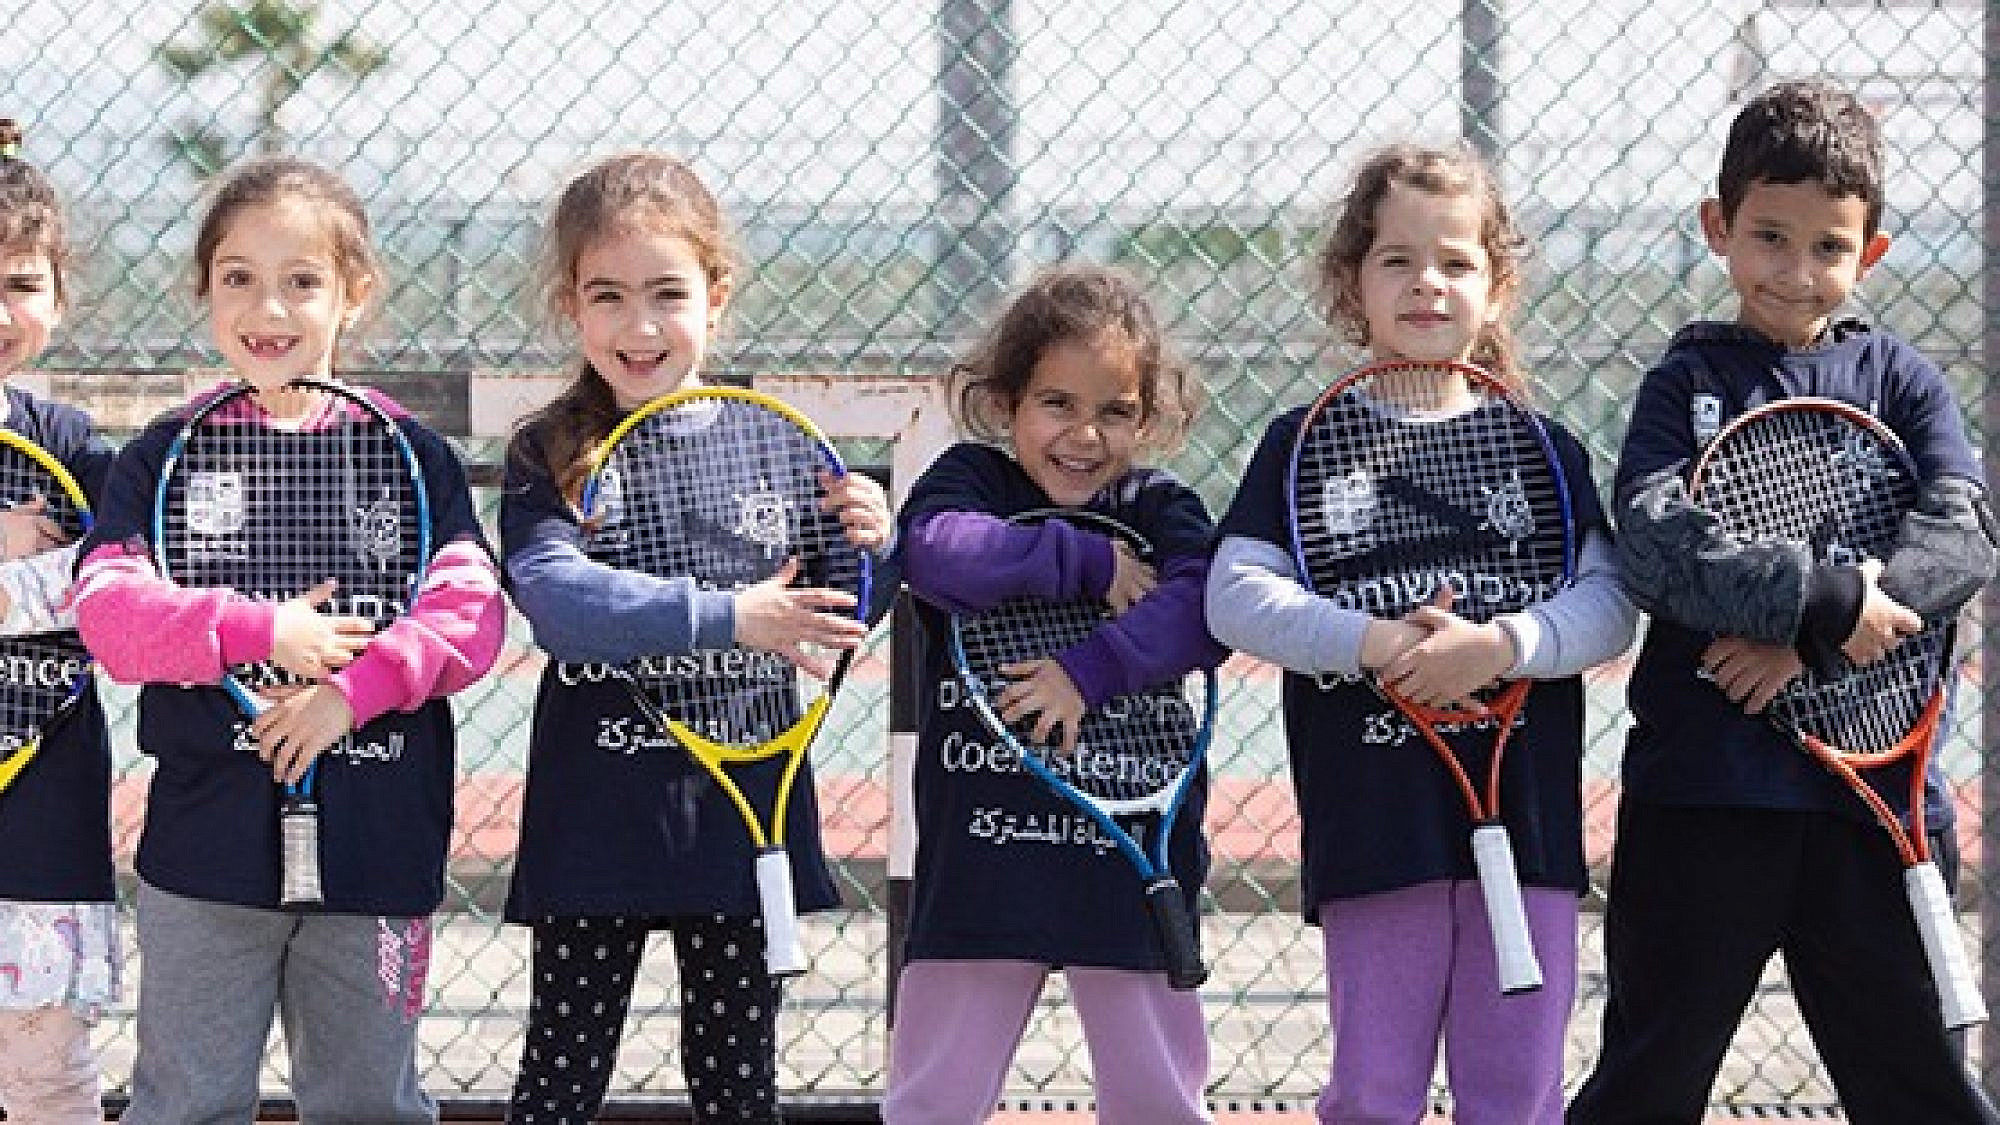 Players from the Israel Tennis & Education Centers wear coexistence-themed shirts. Credit: Israel Tennis & Education Centers.